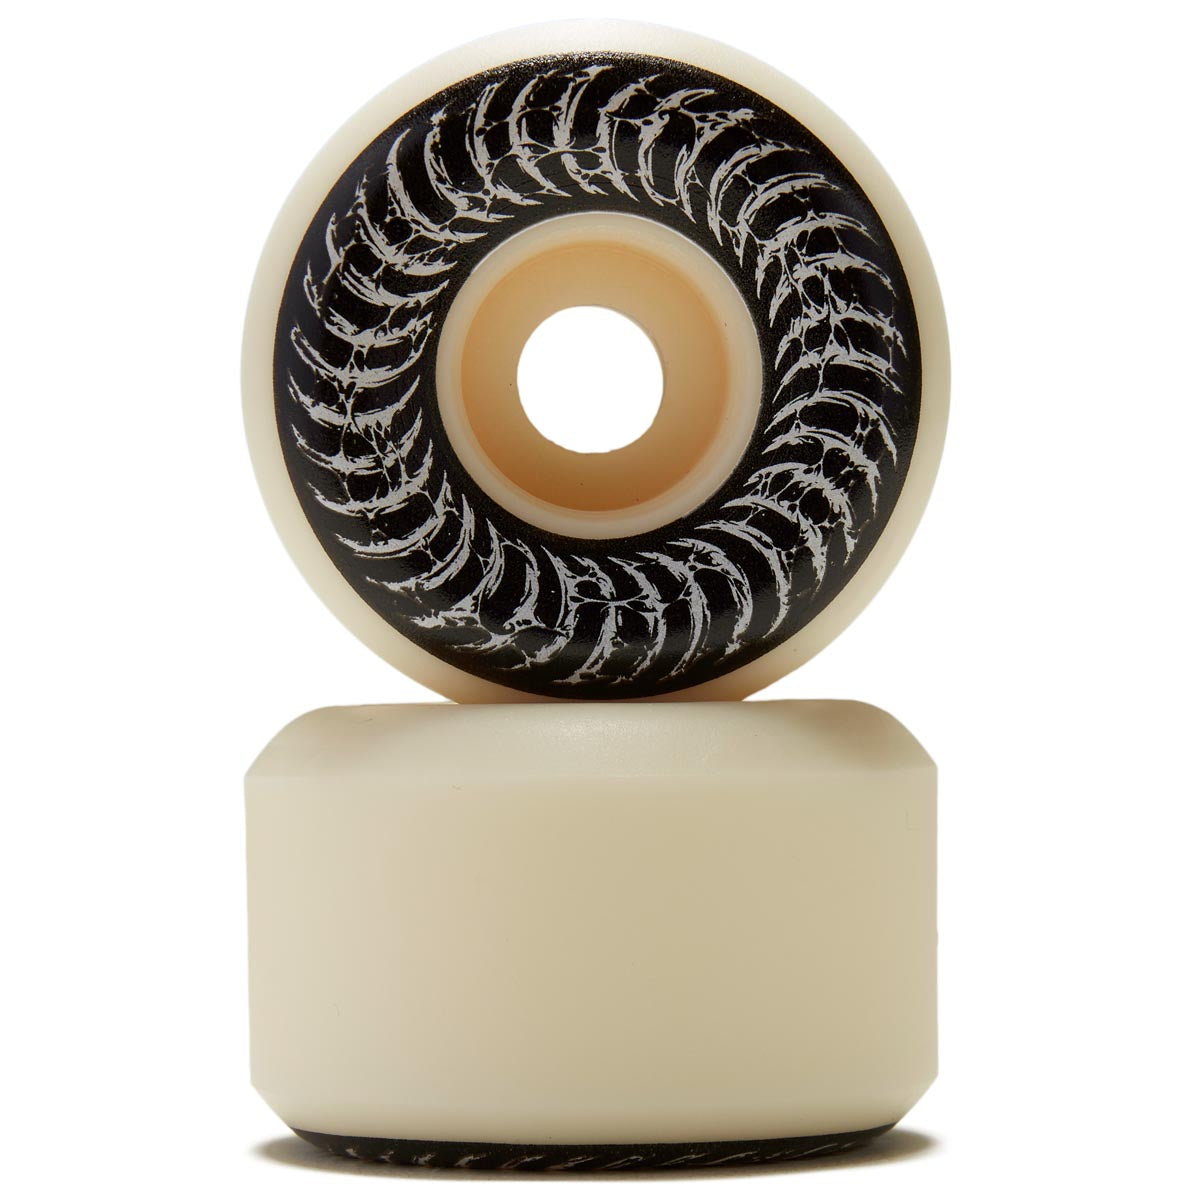 Spitfire F4 99 Decay Conical Full Skateboard Wheels - Natural - 56mm image 2